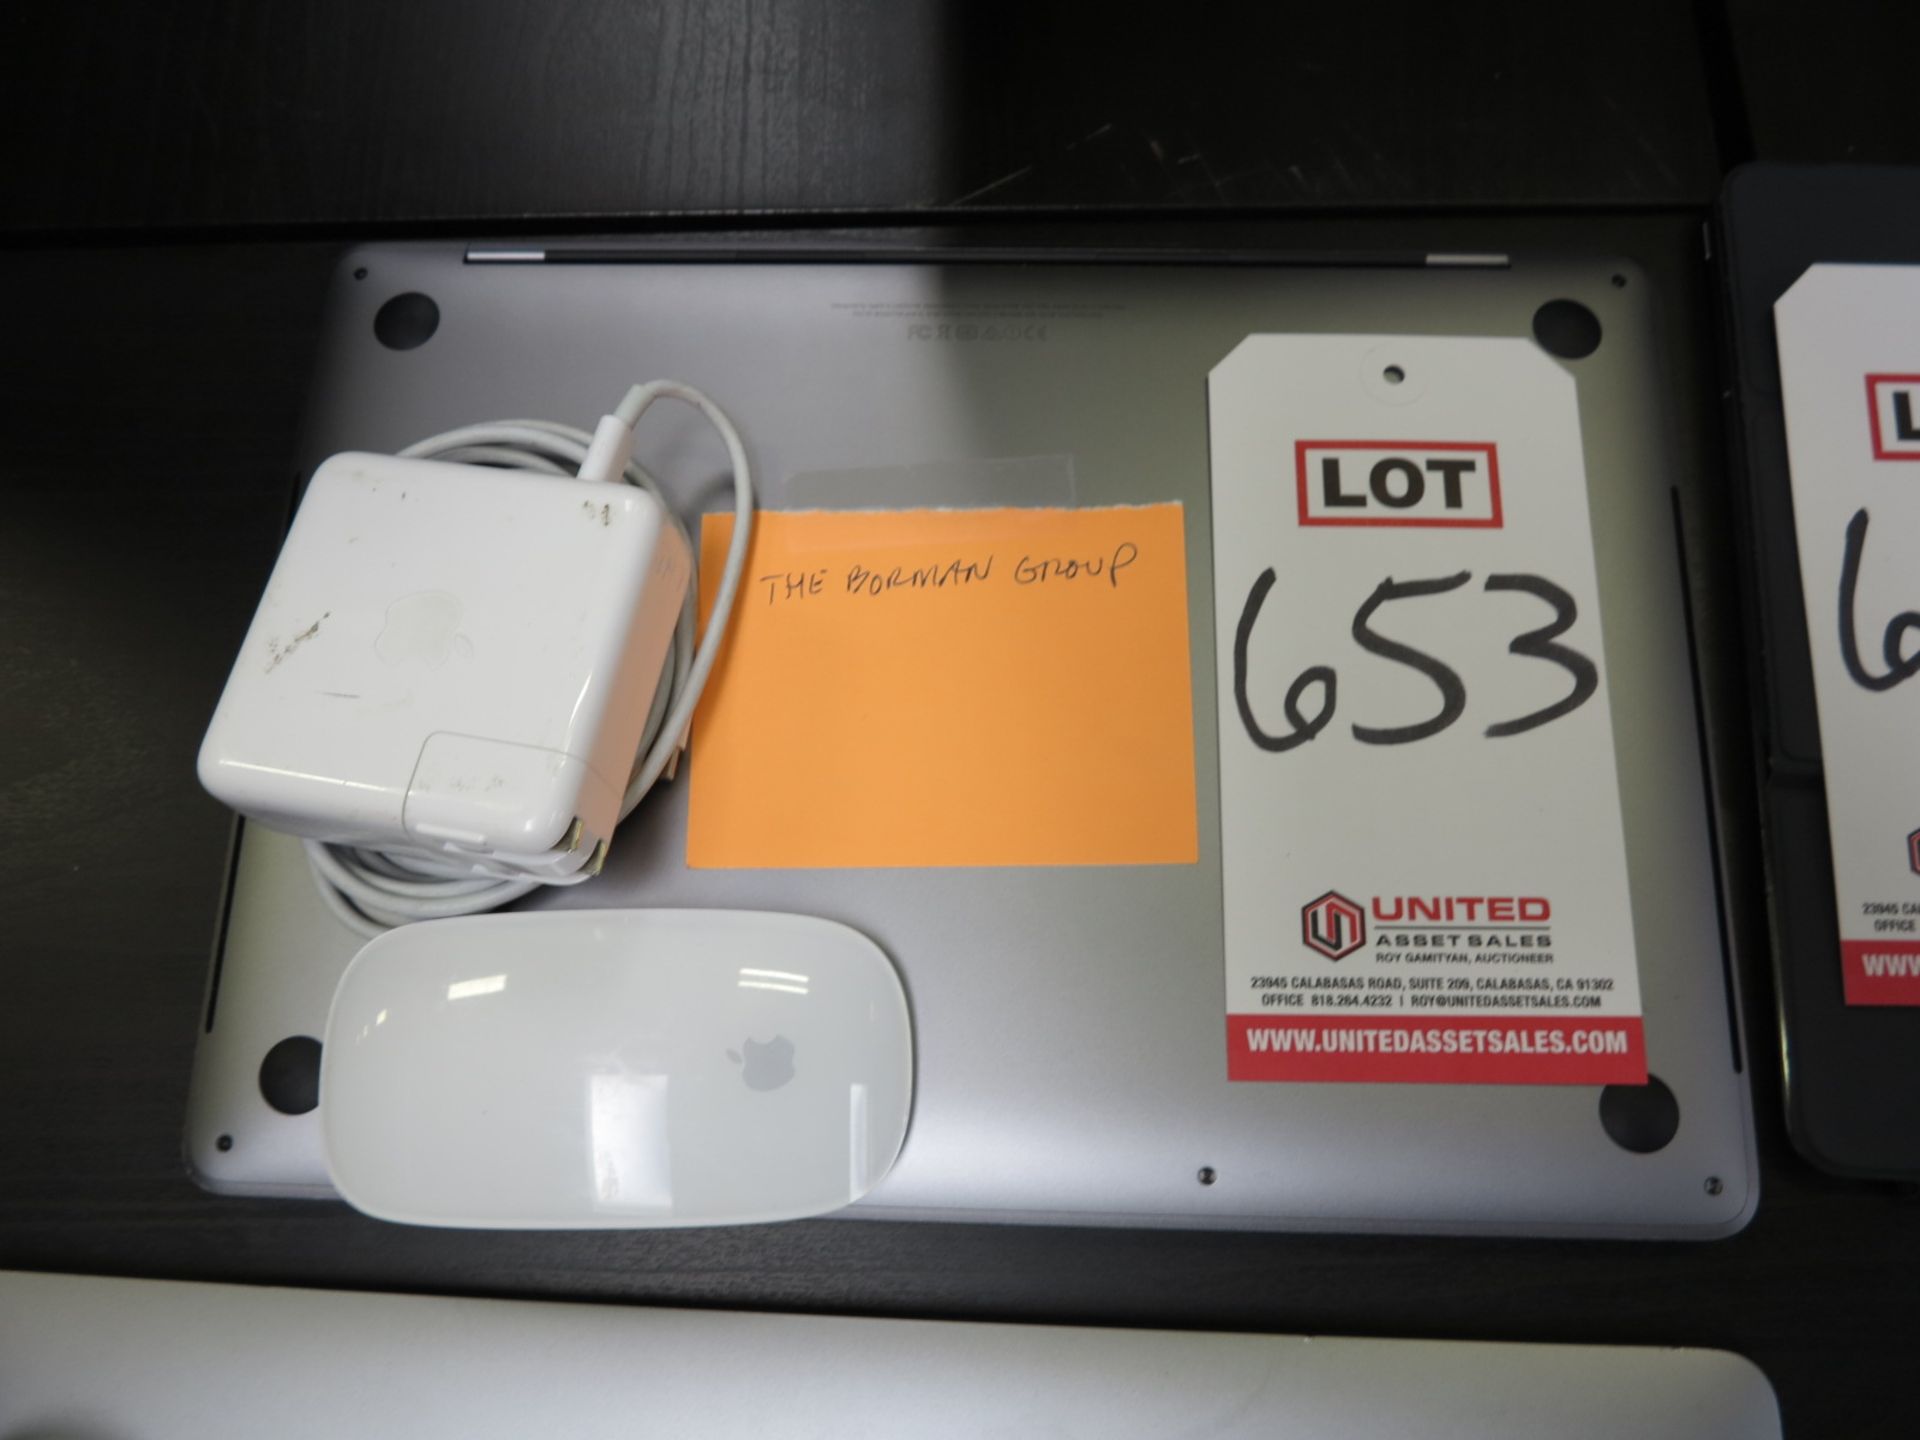 APPLE MACBOOK PRO, W/ POWER PACK AND MOUSE